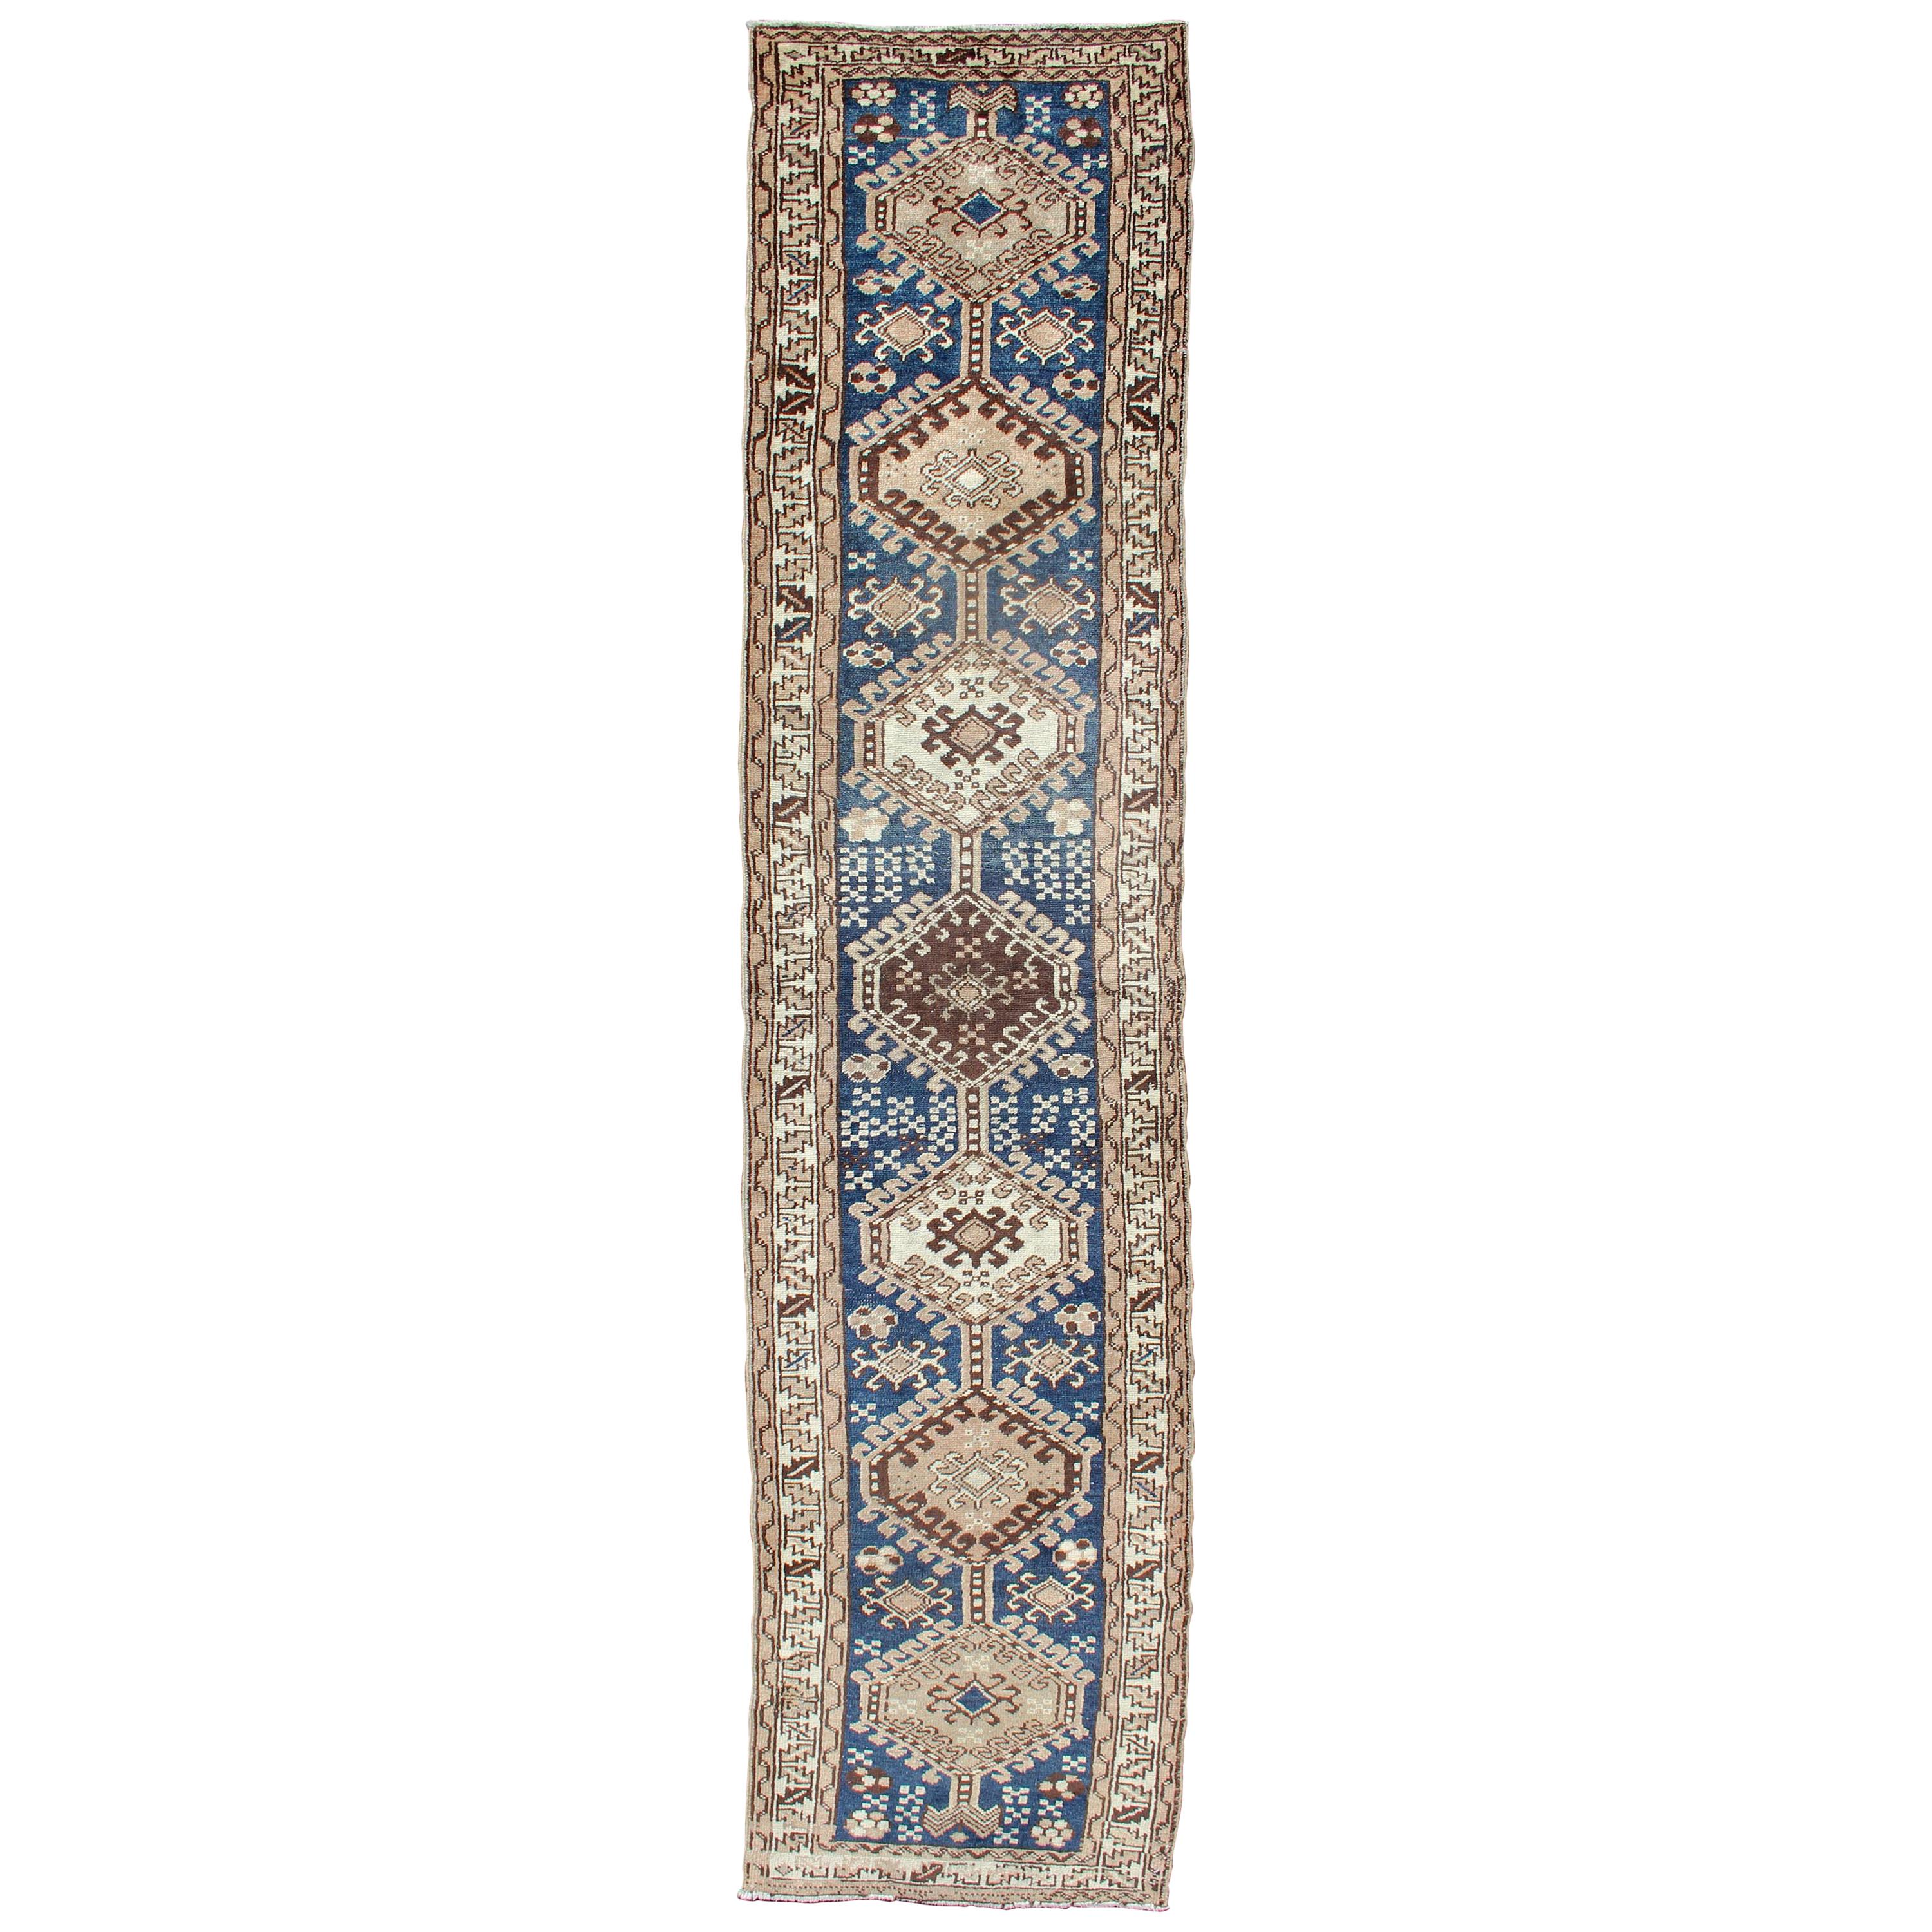 Antique Blue Tribal Karajeh Runner With Navy Blue, Brown and Earth Tones